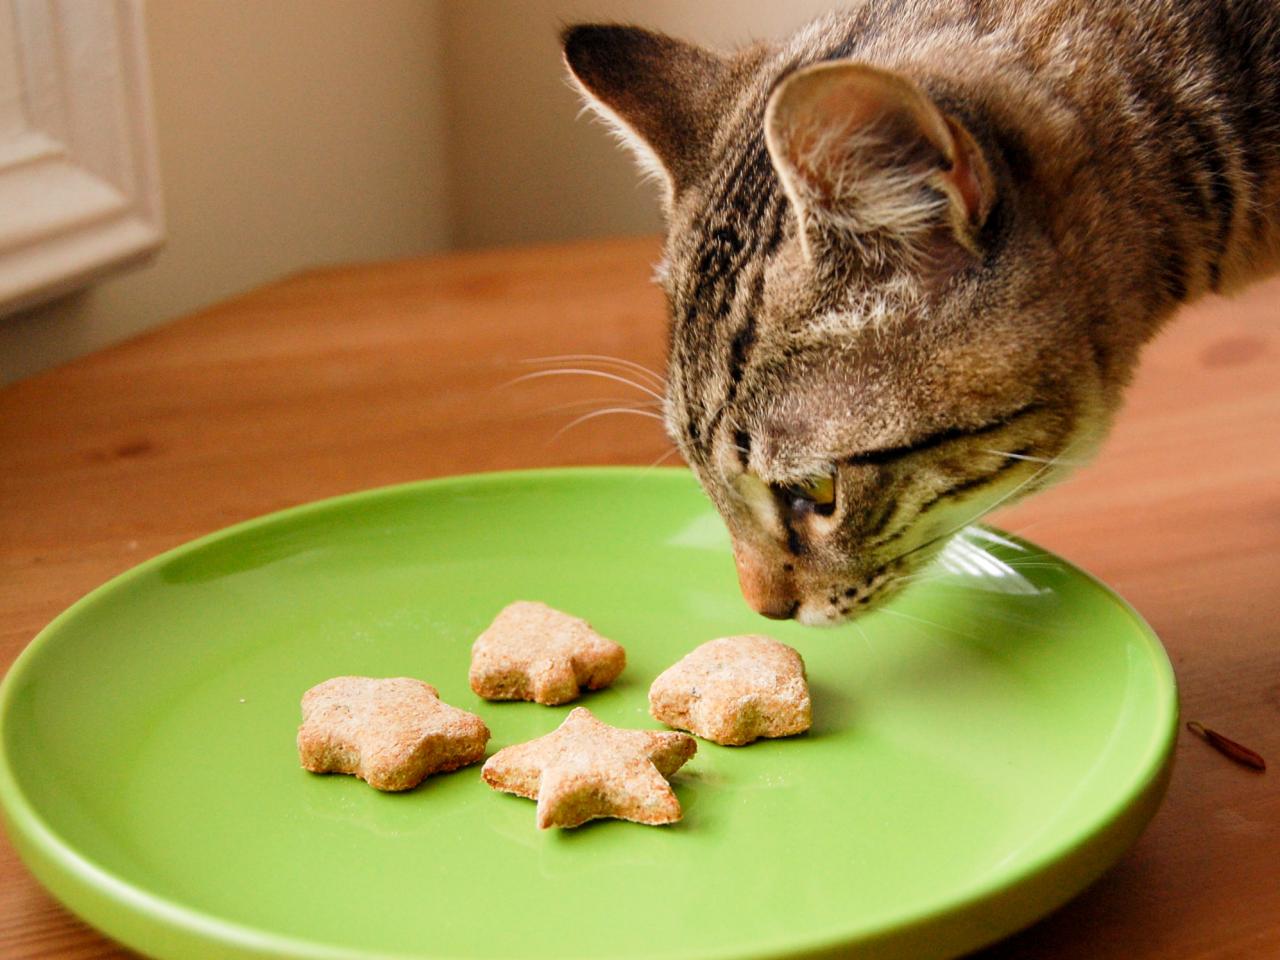 safe snacks for cats